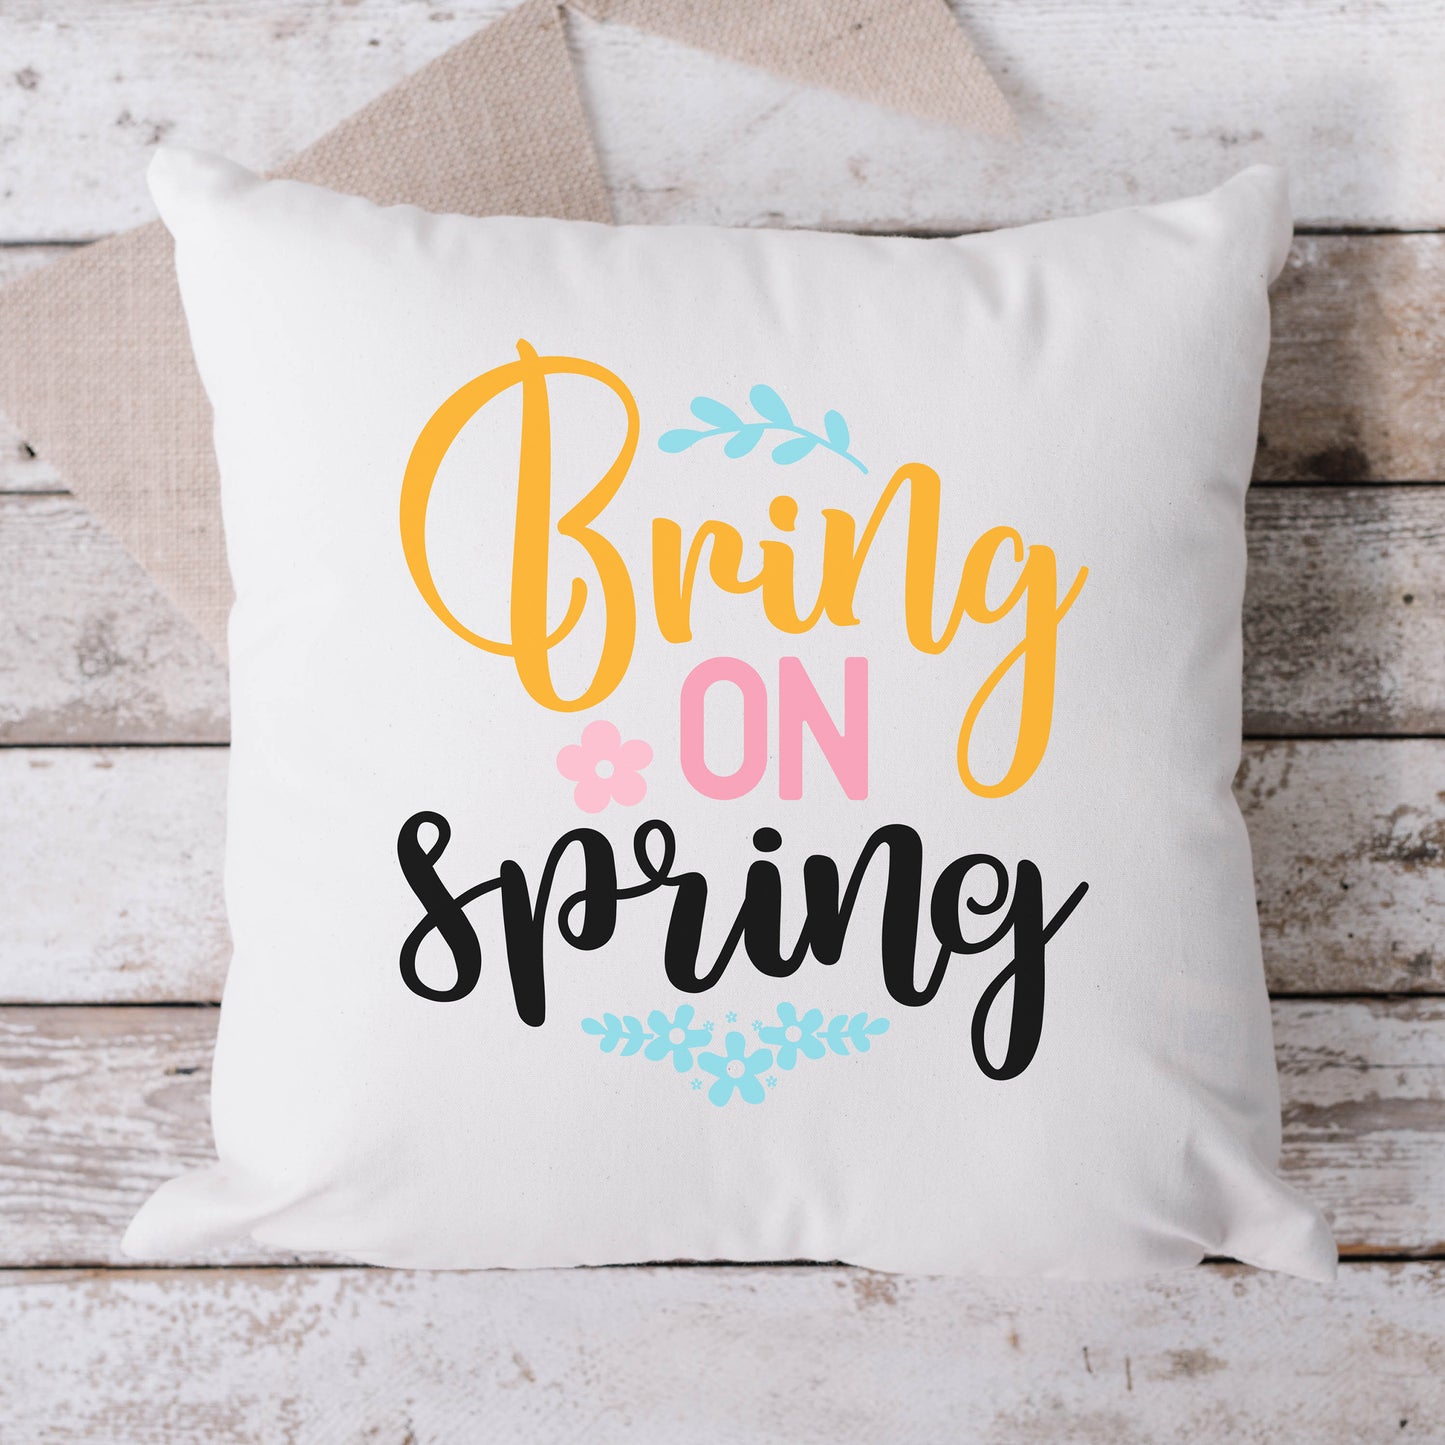 "Bring On Spring" Graphic